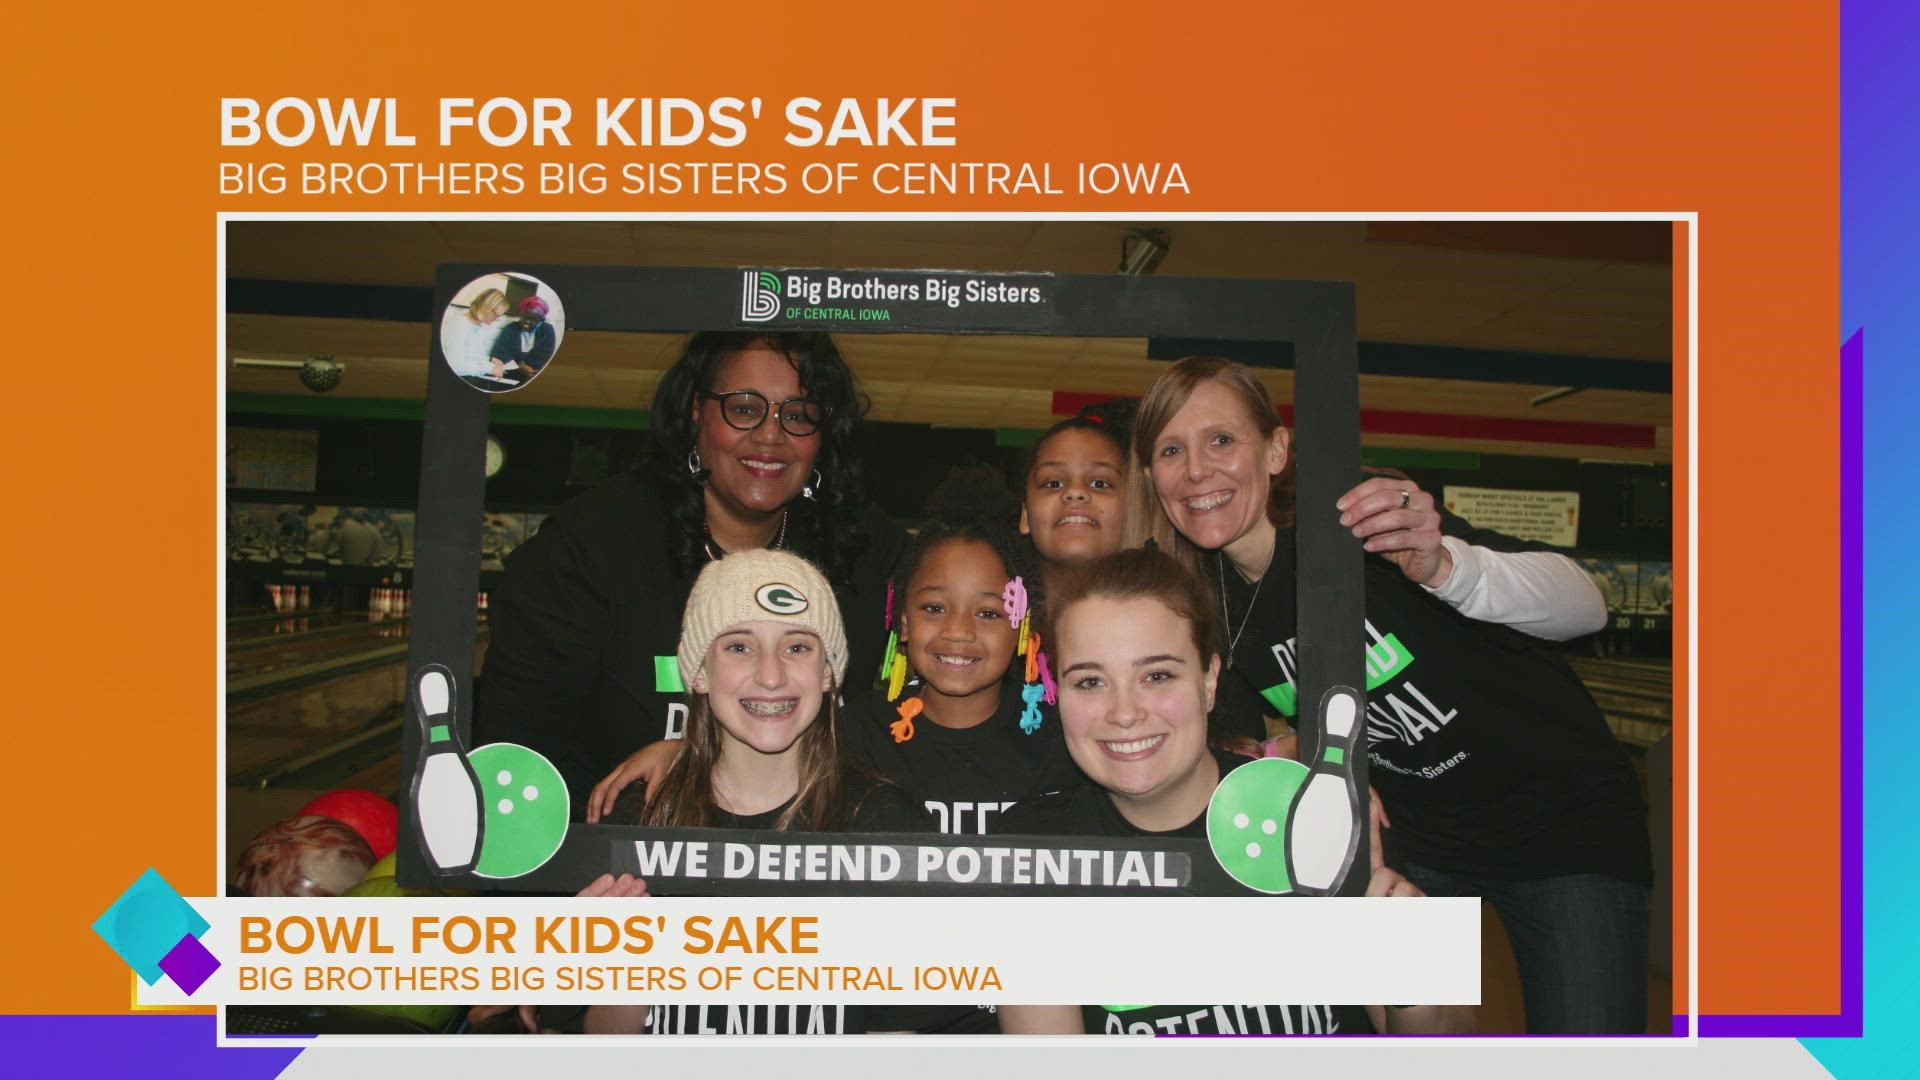 Big Brothers Big Sisters of Central Iowa "Bowl For Kids' Sake" 2022 is happening over the next couple of weeks at several locations around the Des Moines area!